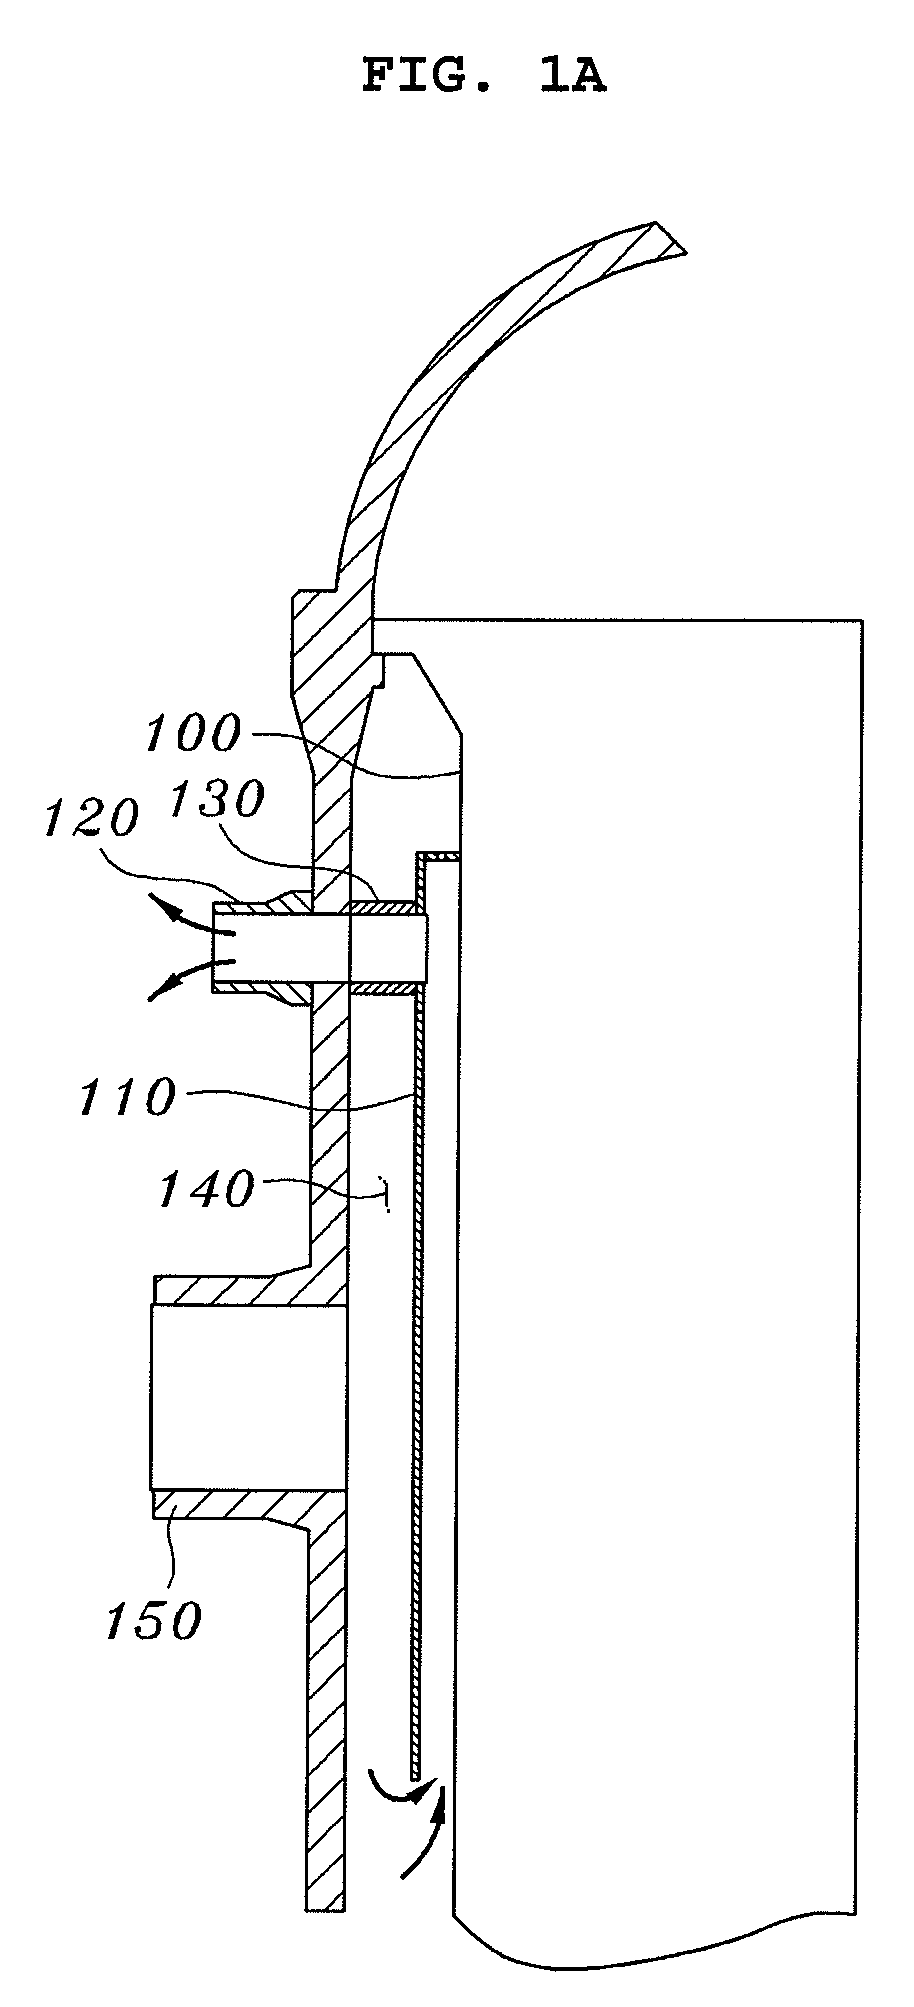 Emergency core cooling system having core barrel injection extension ducts